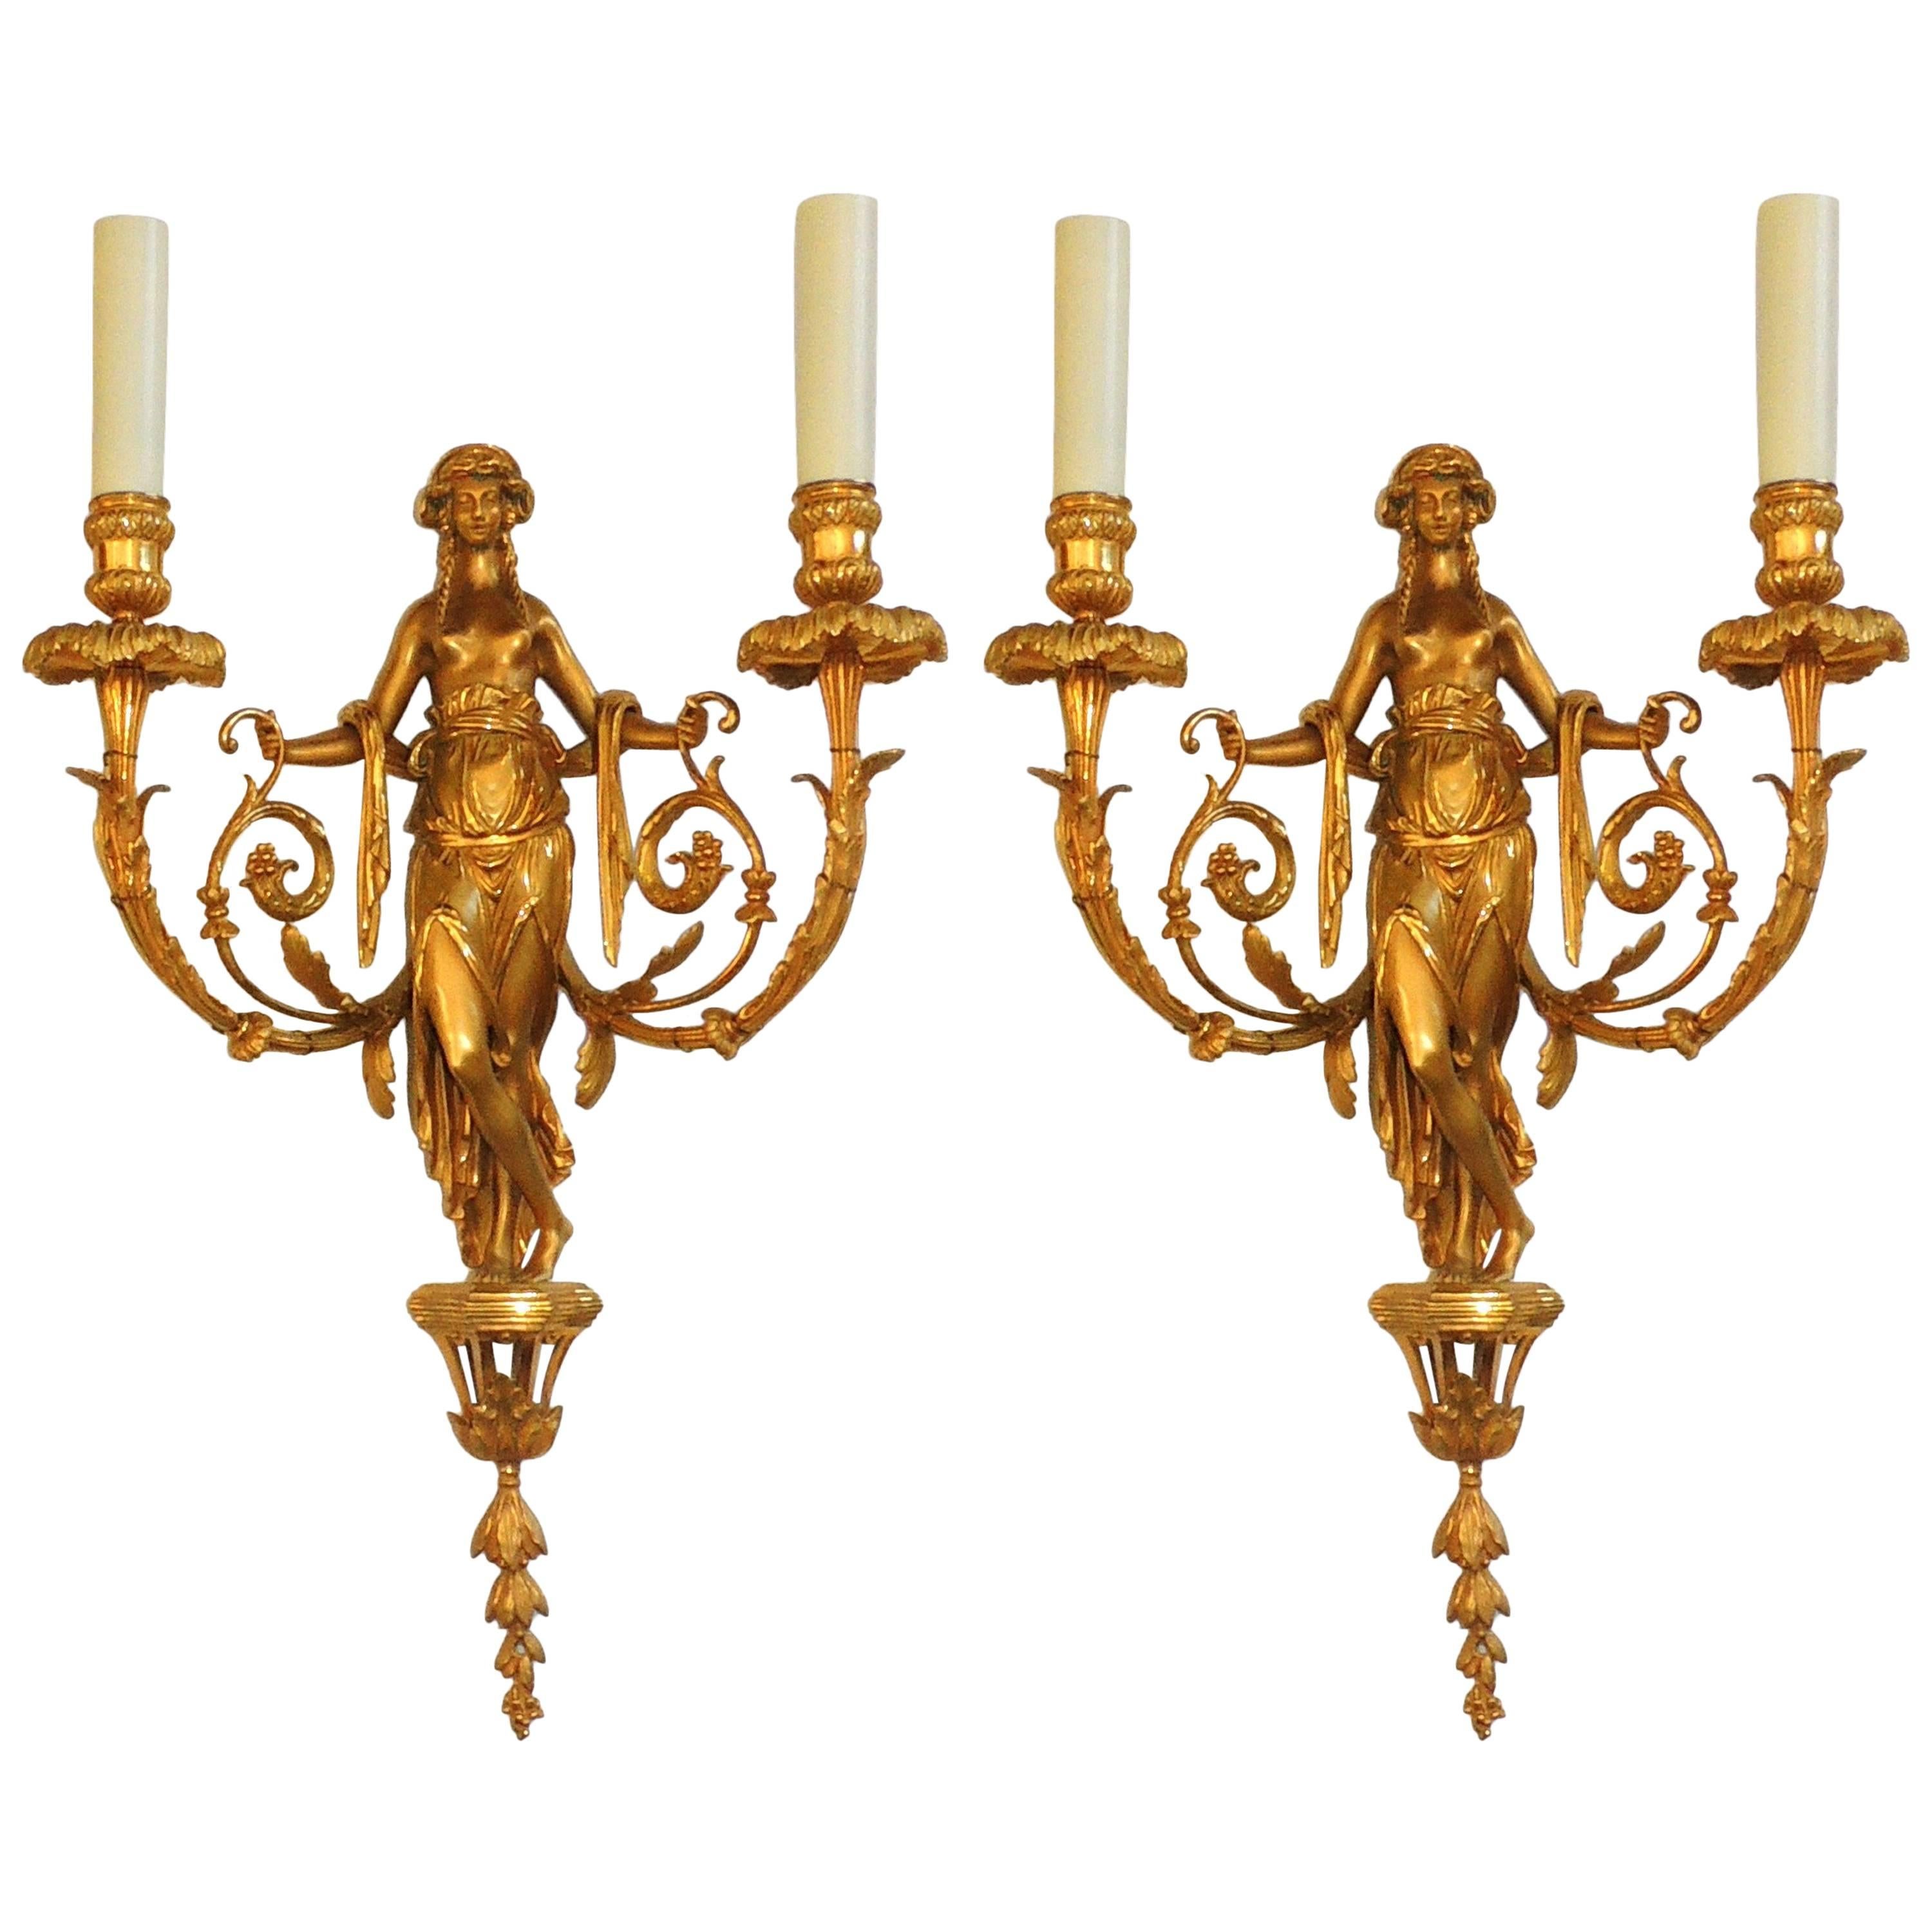 Wonderful Pair of French Doré Bronze Female Maiden Floral Garlands Swag Sconces